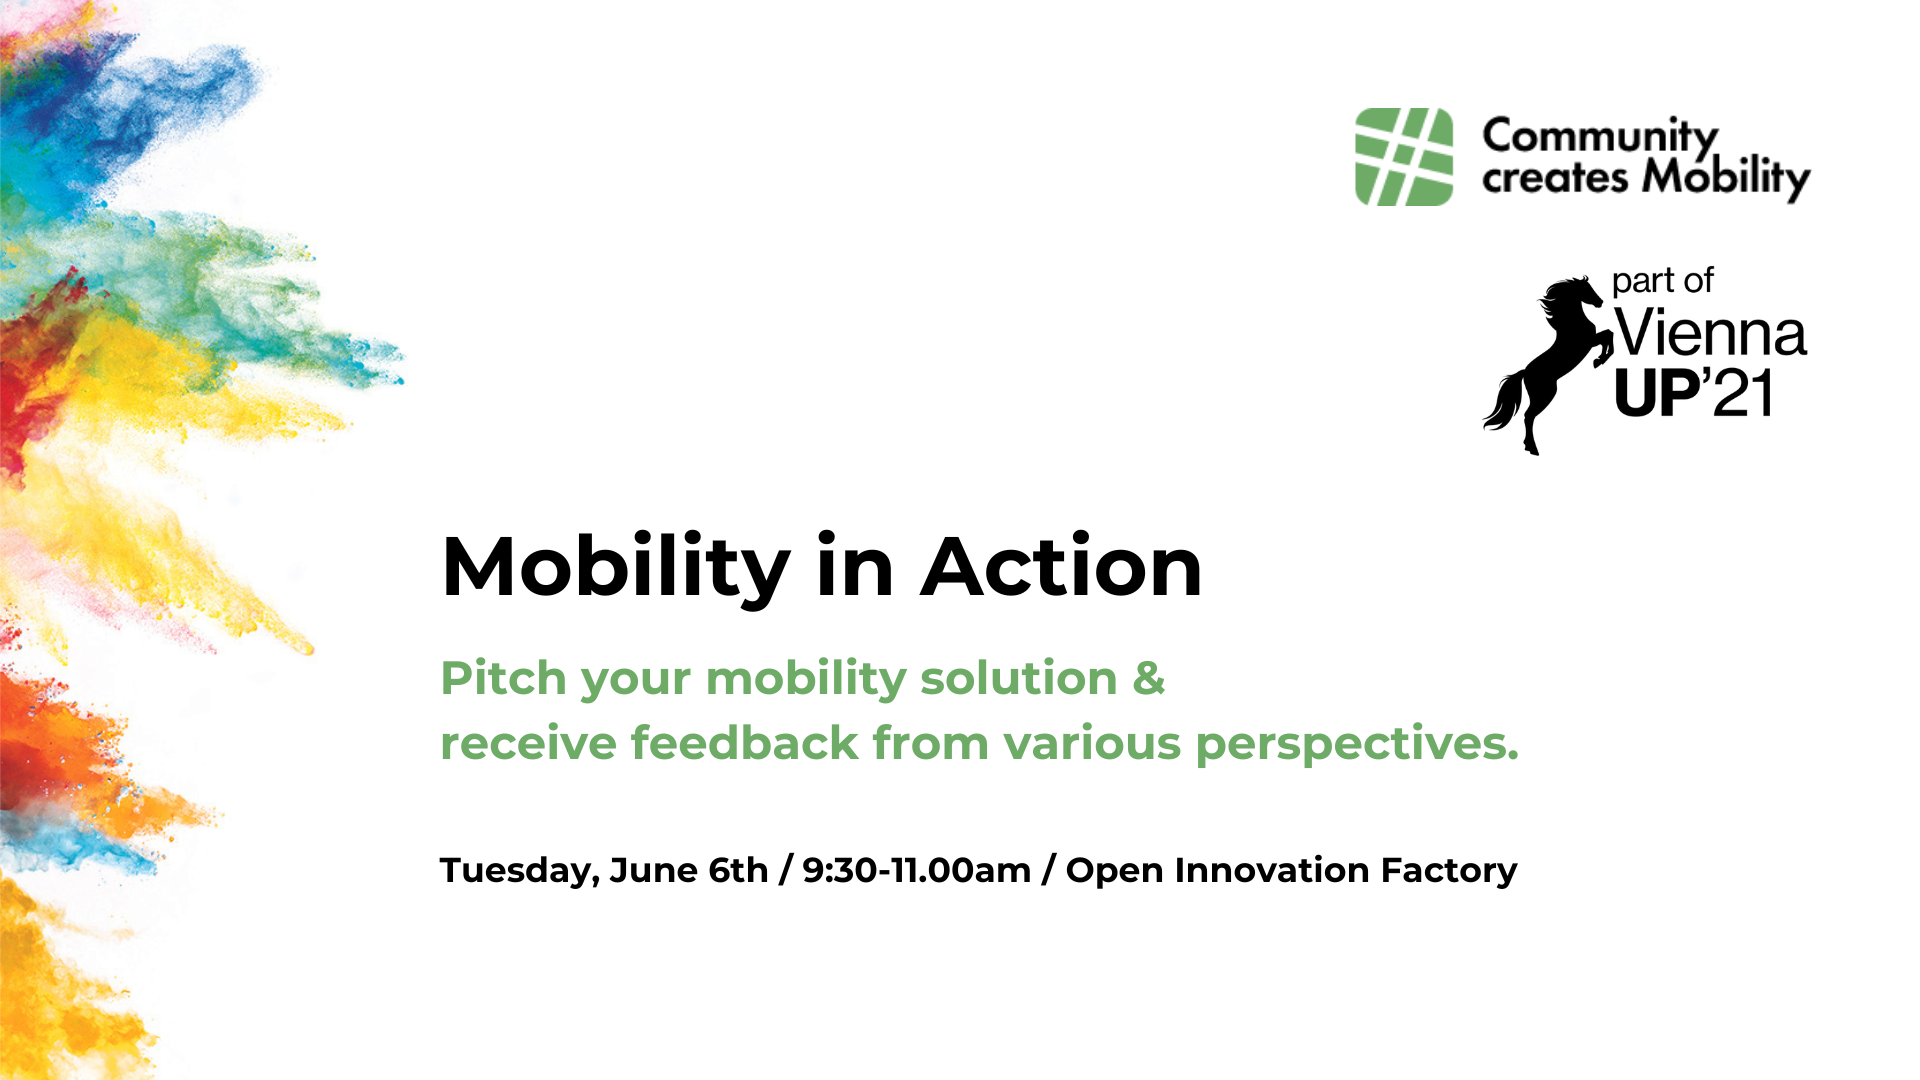 Mobility in Action at ViennaUp